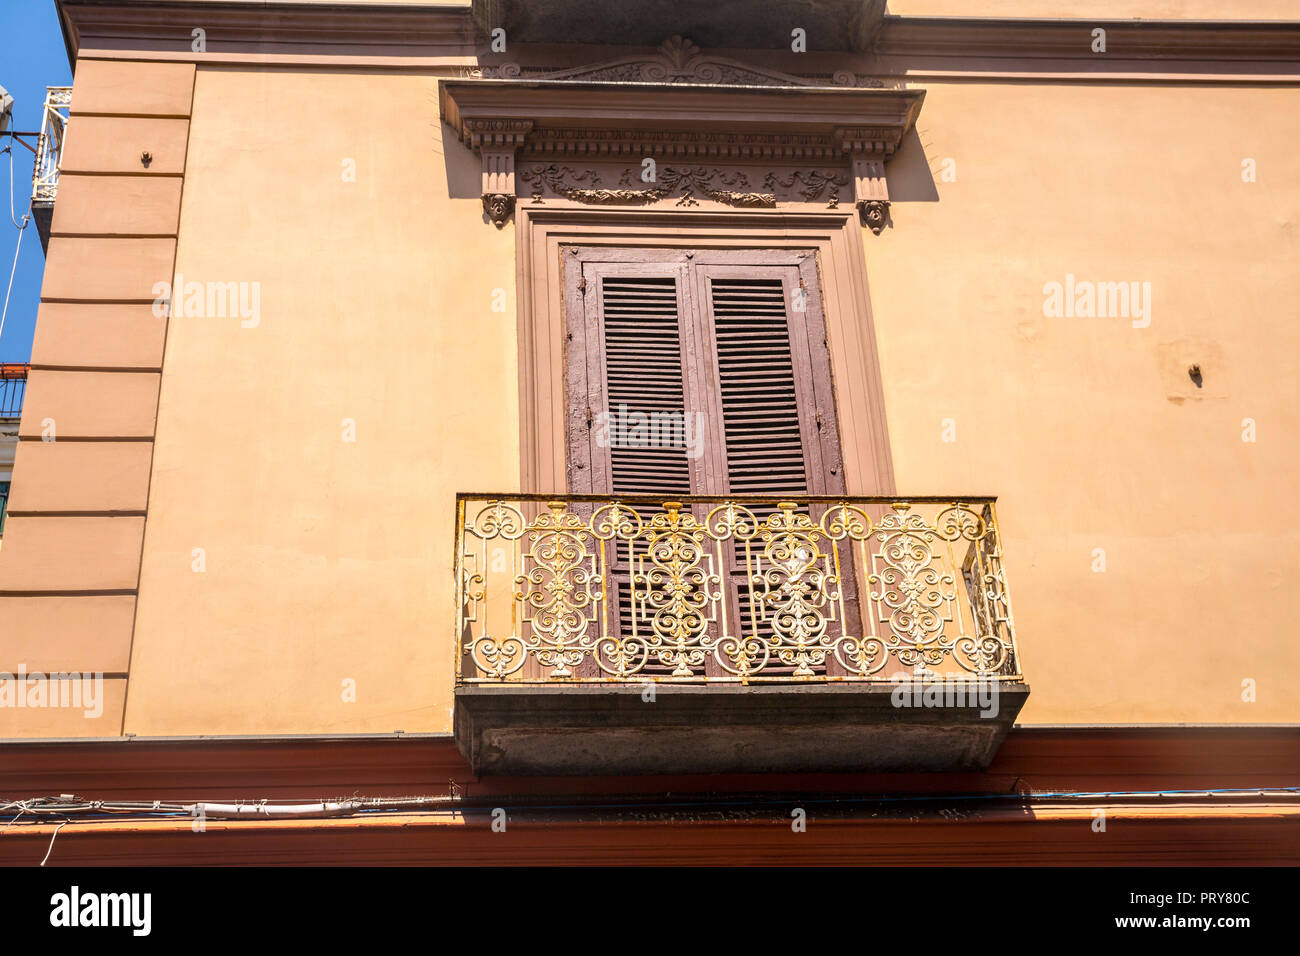 Italian buildings, wooden shutters, balcony, balconies, verandah, old fashioned, vintage concept, travel tourism, holiday, travelling ornate iron Stock Photo